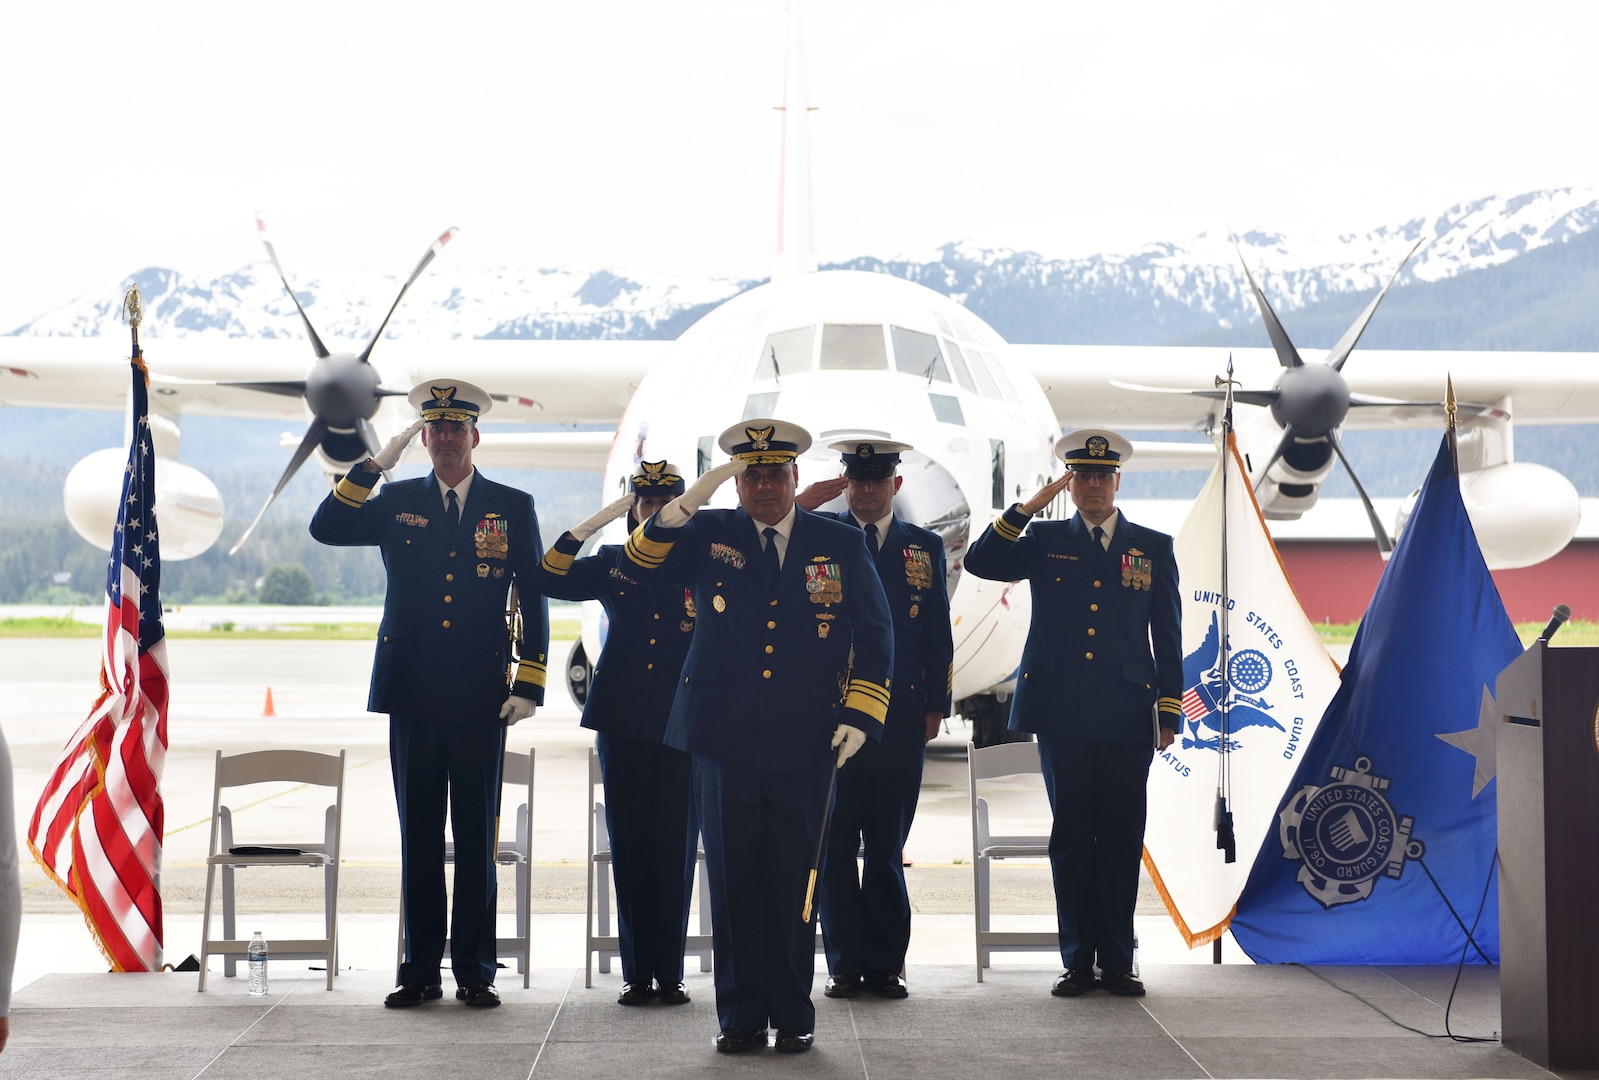 Rear Admiral Megan Dean, Seventeenth district commander, speaks during the Coast Guard 17th District change-of command ceremony at the Alaska Army National Guard Army Aviation Operating Facility in Juneau, Alaska, June 8, 2023.
 
Rear Adm. Nathan Moore transferred the command of the Coast Guard’s 17th District to Rear Adm. Megan Dean under the supervision of Vice Adm. Andrew J. Tiongson.
 
As the 17th District commander, Dean, will be responsible for all Coast Guard operations throughout Alaska, the North Pacific and the Arctic which includes protecting life and property, enforcing federal laws and treaties, preserving living marine resources, and promoting national security. Headquartered in Juneau, the 17th District encompasses 3.8 million square miles and over 44,000 miles of shoreline. During an average year the 2,500 active duty, reserve, civilian and auxiliary personnel of the 17th District save 264 lives and assist 636 people.
 
Dean was previously assigned as the Coast Guard director of governmental and public affairs. She was responsible for responsible for external engagement with Congress, the media, and other inter-governmental entities.
 
Moore, who originally took command of the 17th District in April 2021, is transferring to Portsmouth, VA., where he will serve as the deputy commander for Coast Guard Atlantic Area.
  
A change-of-command ceremony marks a transfer of total responsibility and authority from one individual to another. It is a time-honored tradition conducted before the assembled crew, as well as honored guests and dignitaries to formally demonstrate the continuity of the authority within a command